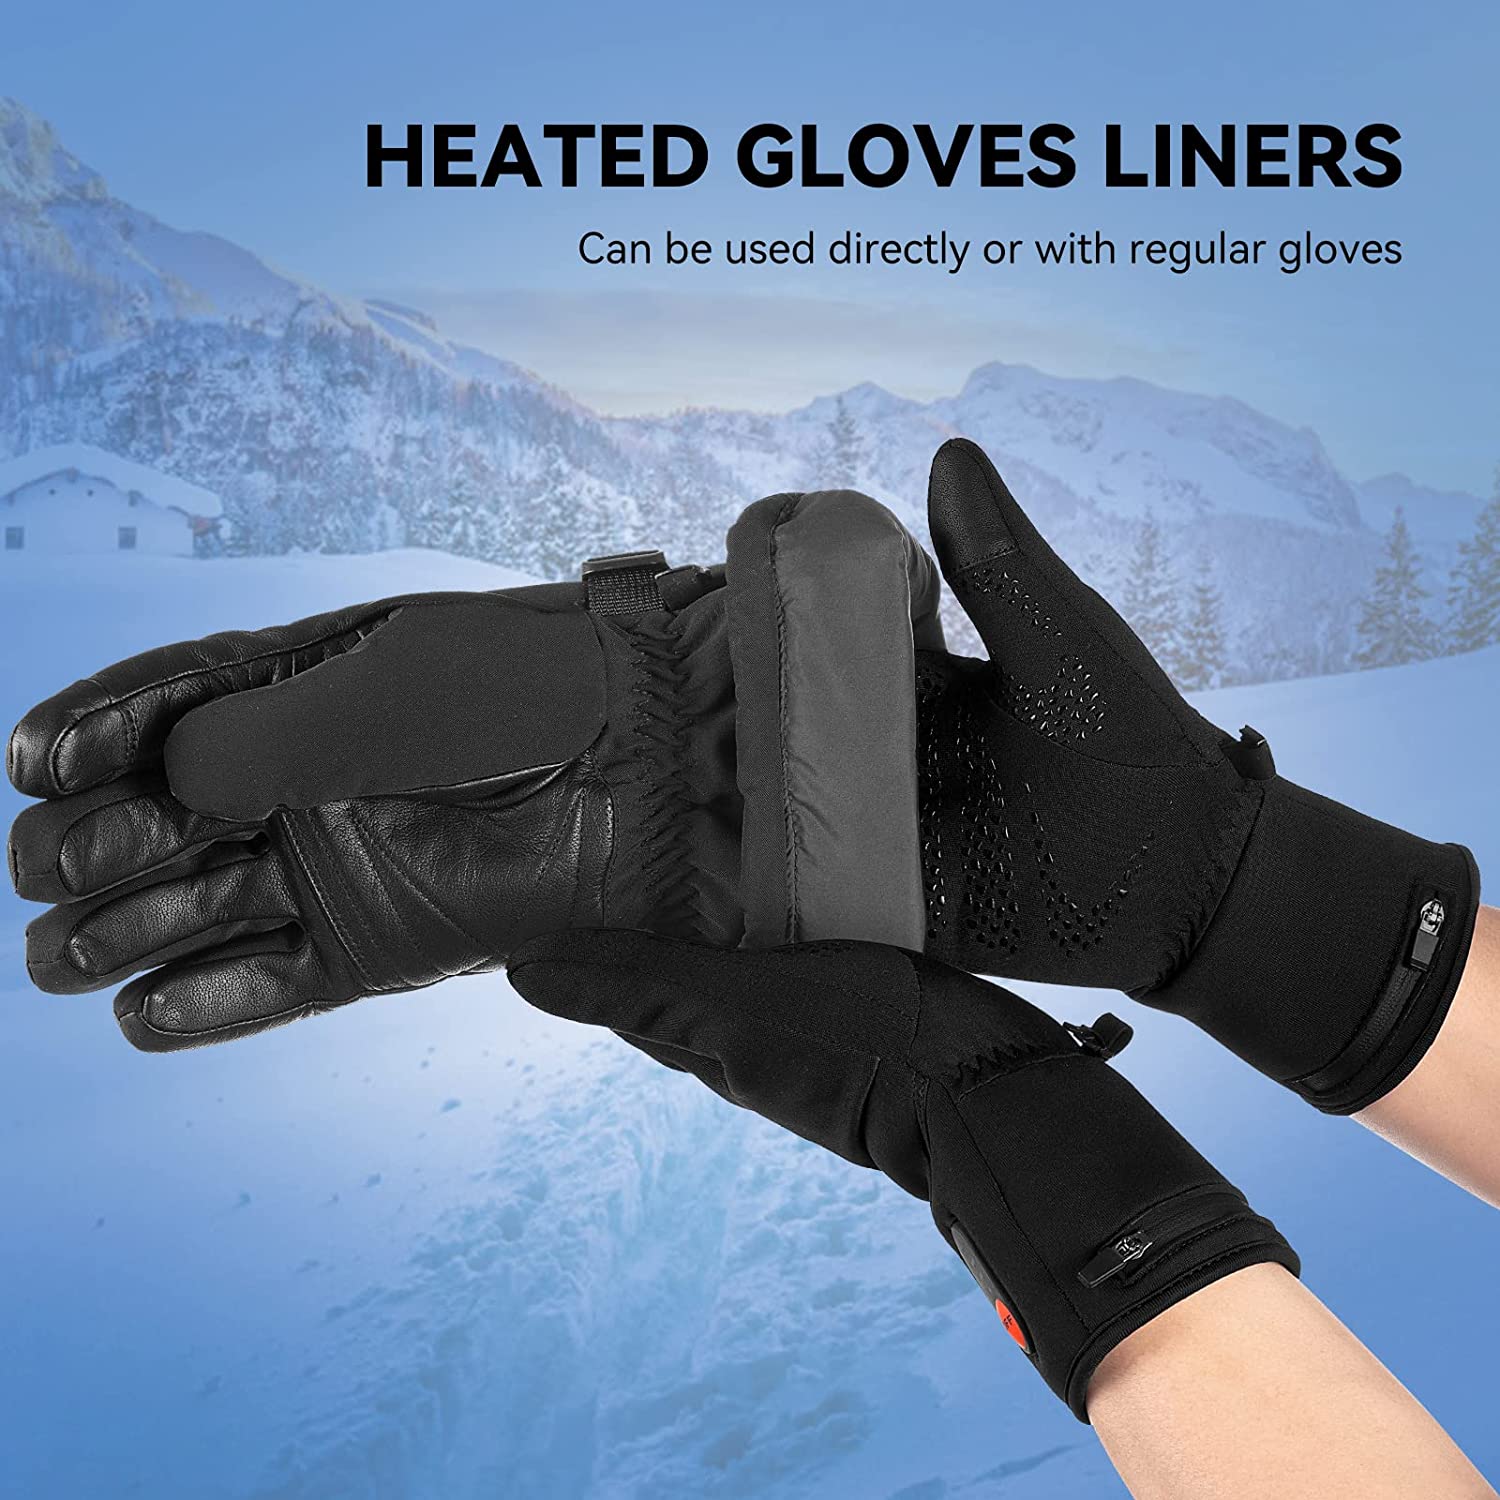 A person is wearing a pair of gloves and placing a rechargeable heated glove over one of the other gloves. The text says, 'Heated glove liners. Can be used directly or with regular gloves.'